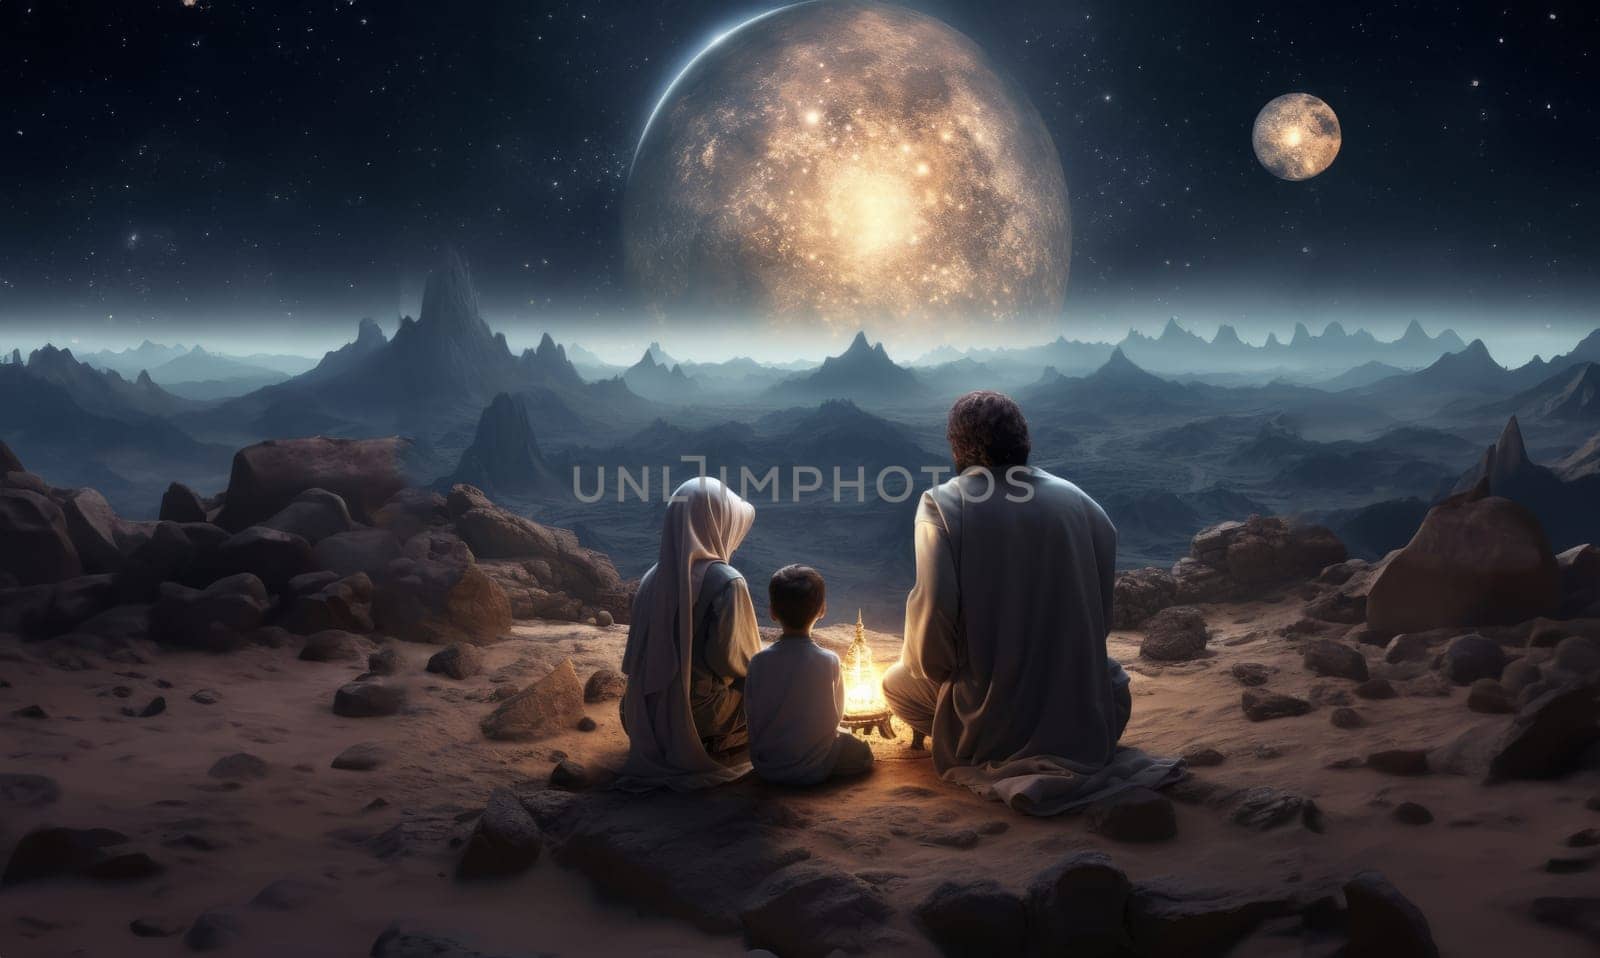 A Muslim family in the ancient mountains of the Sahara gathers to welcome the breaking of the fast at iftar during Ramadan, embodying traditions of unity, compassion, and gratitude in a serene and sacred setting.Generated image by dotshock